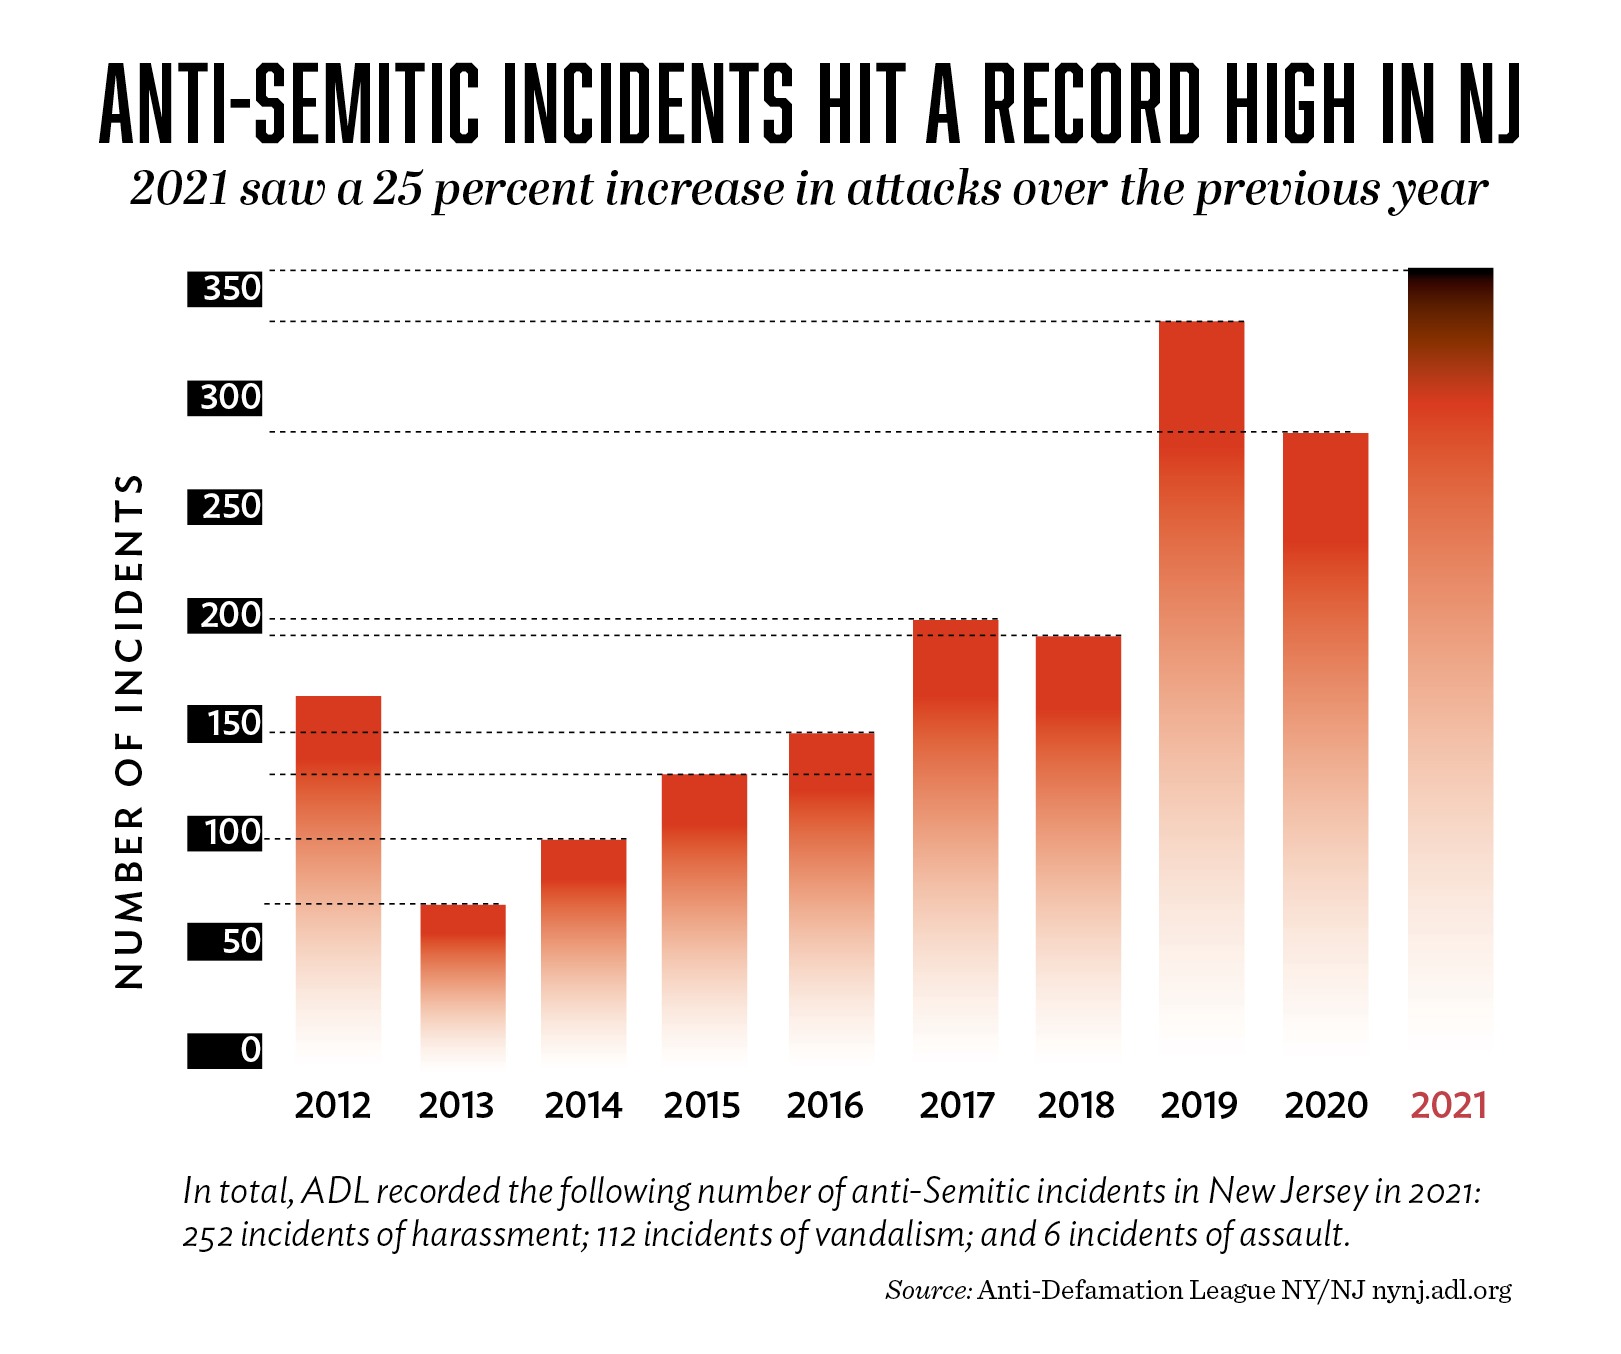 Chart showing rise of anti-Semitic incidents in New Jersey